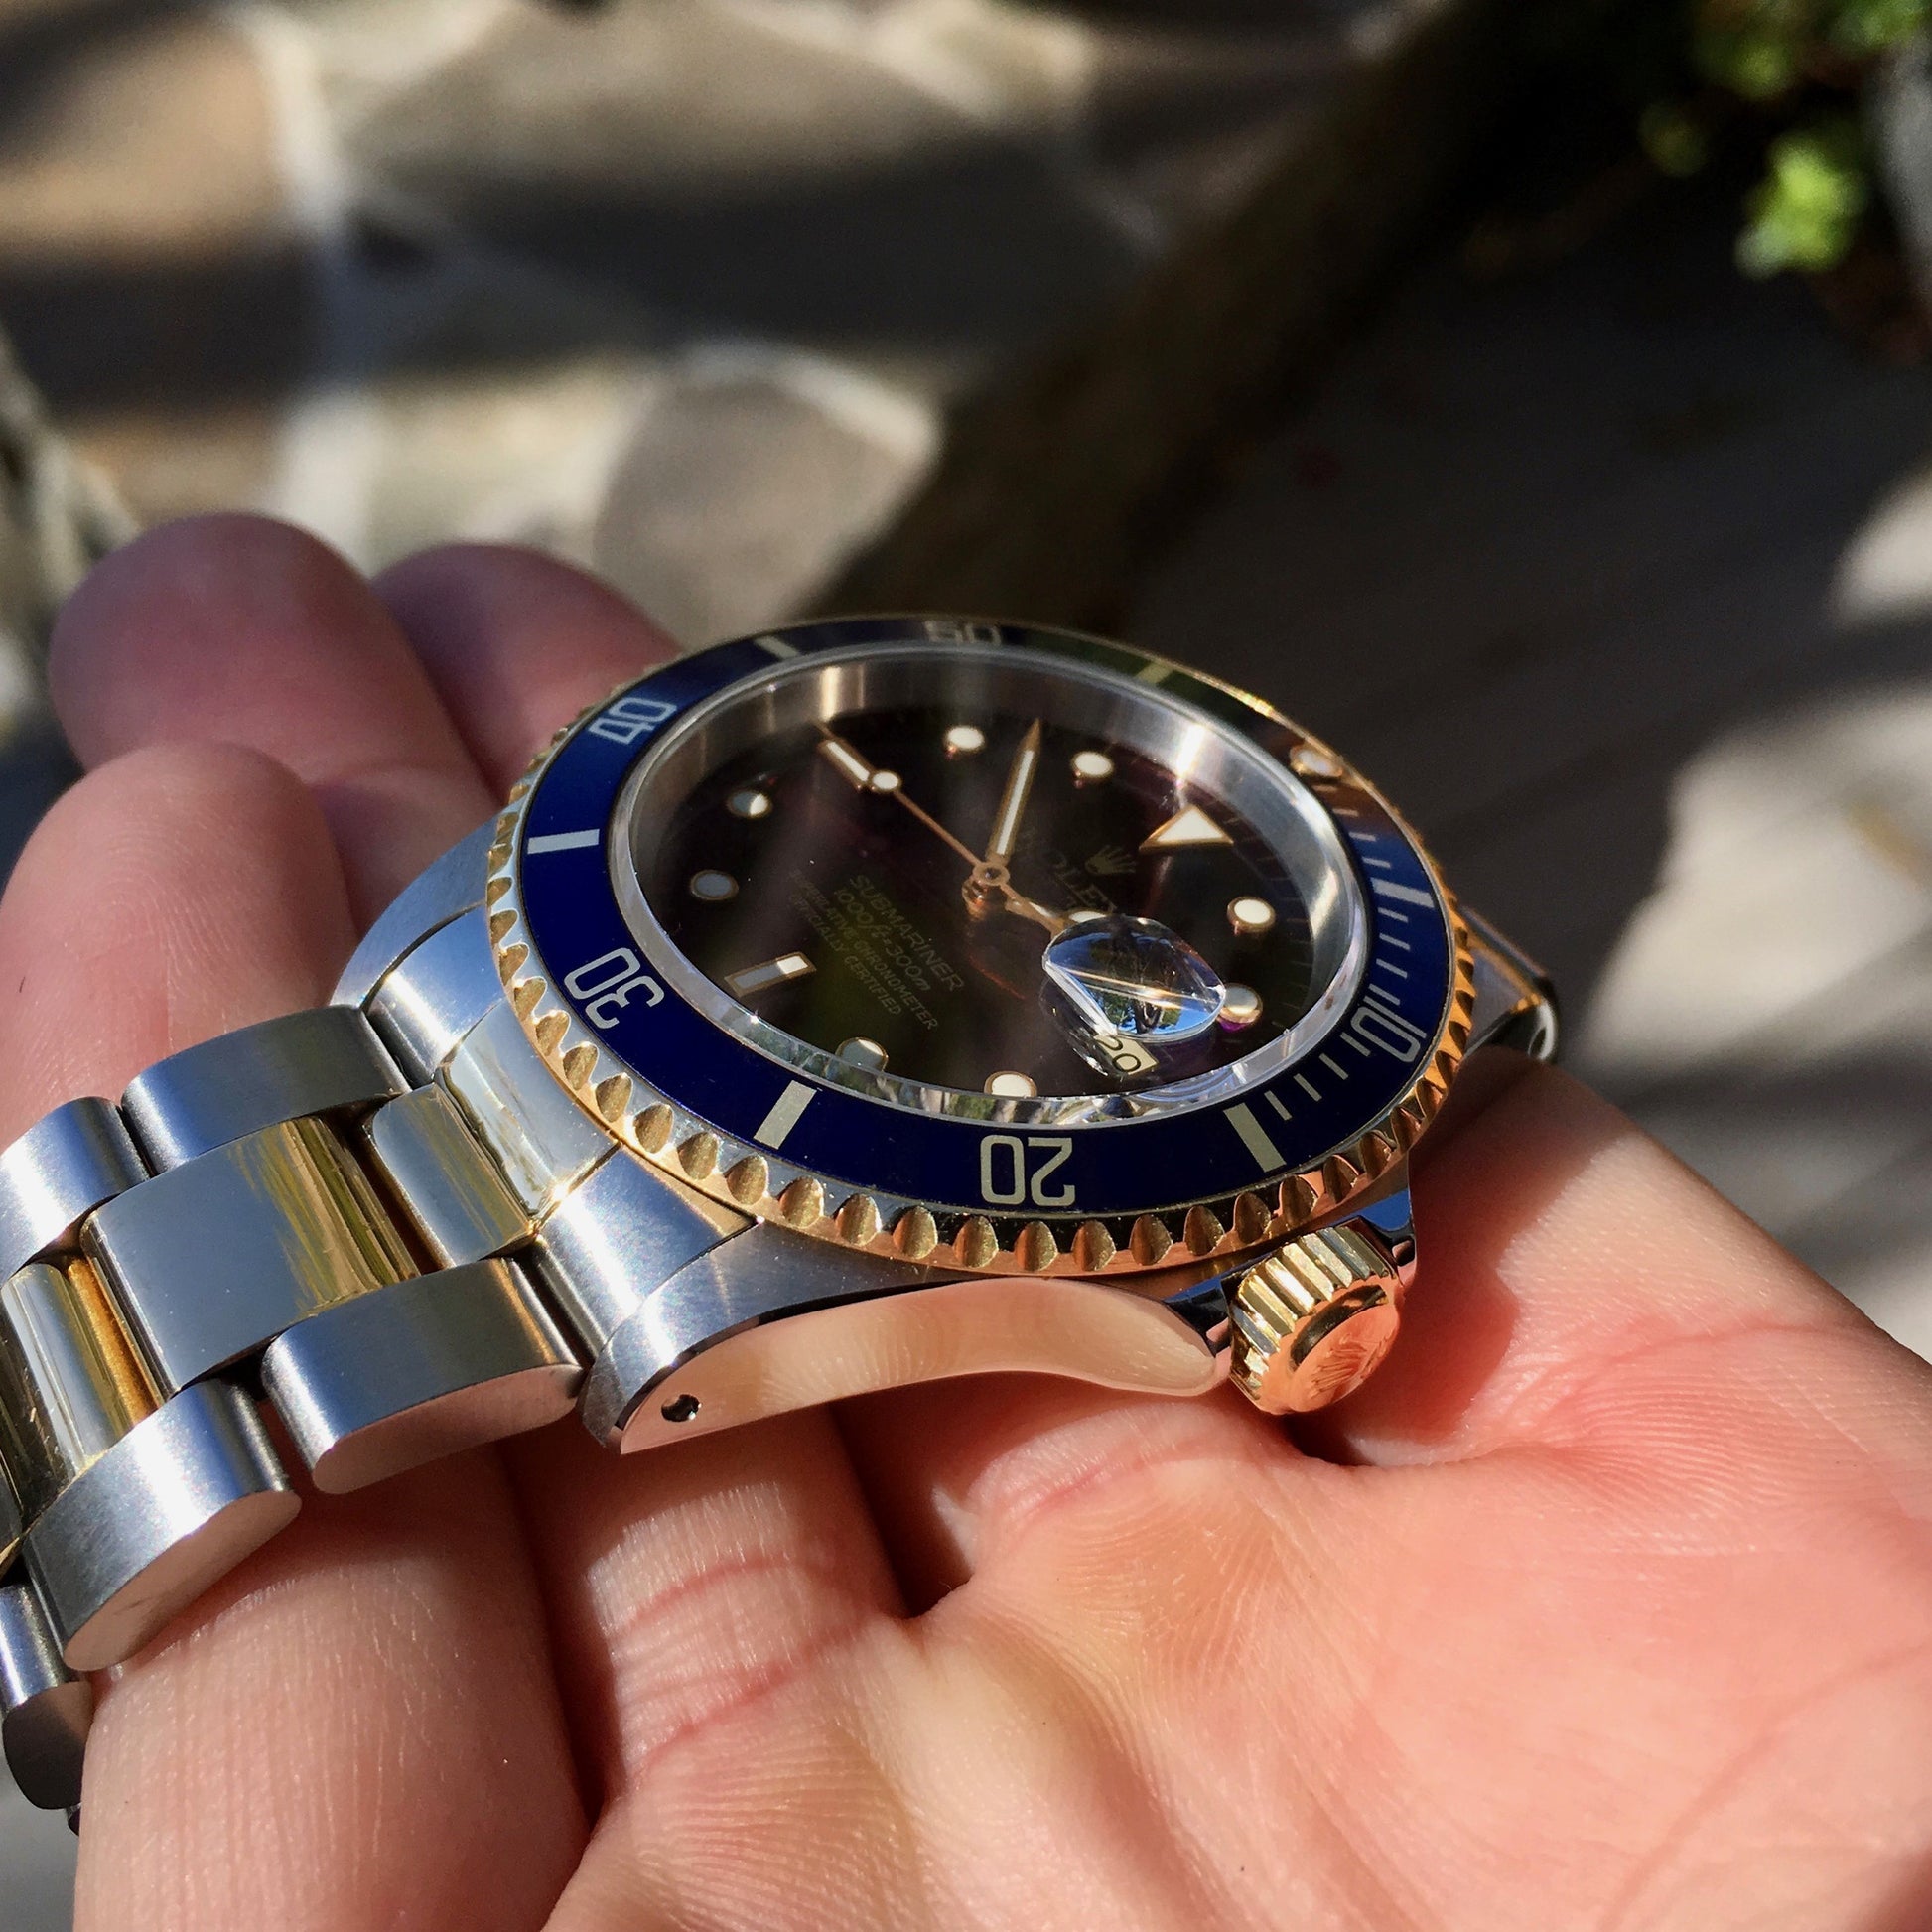 Rolex Submariner 16613 Two Tone Purple Color Change Steel 18K Gold "S" Serial 1993 Wristwatch - Hashtag Watch Company